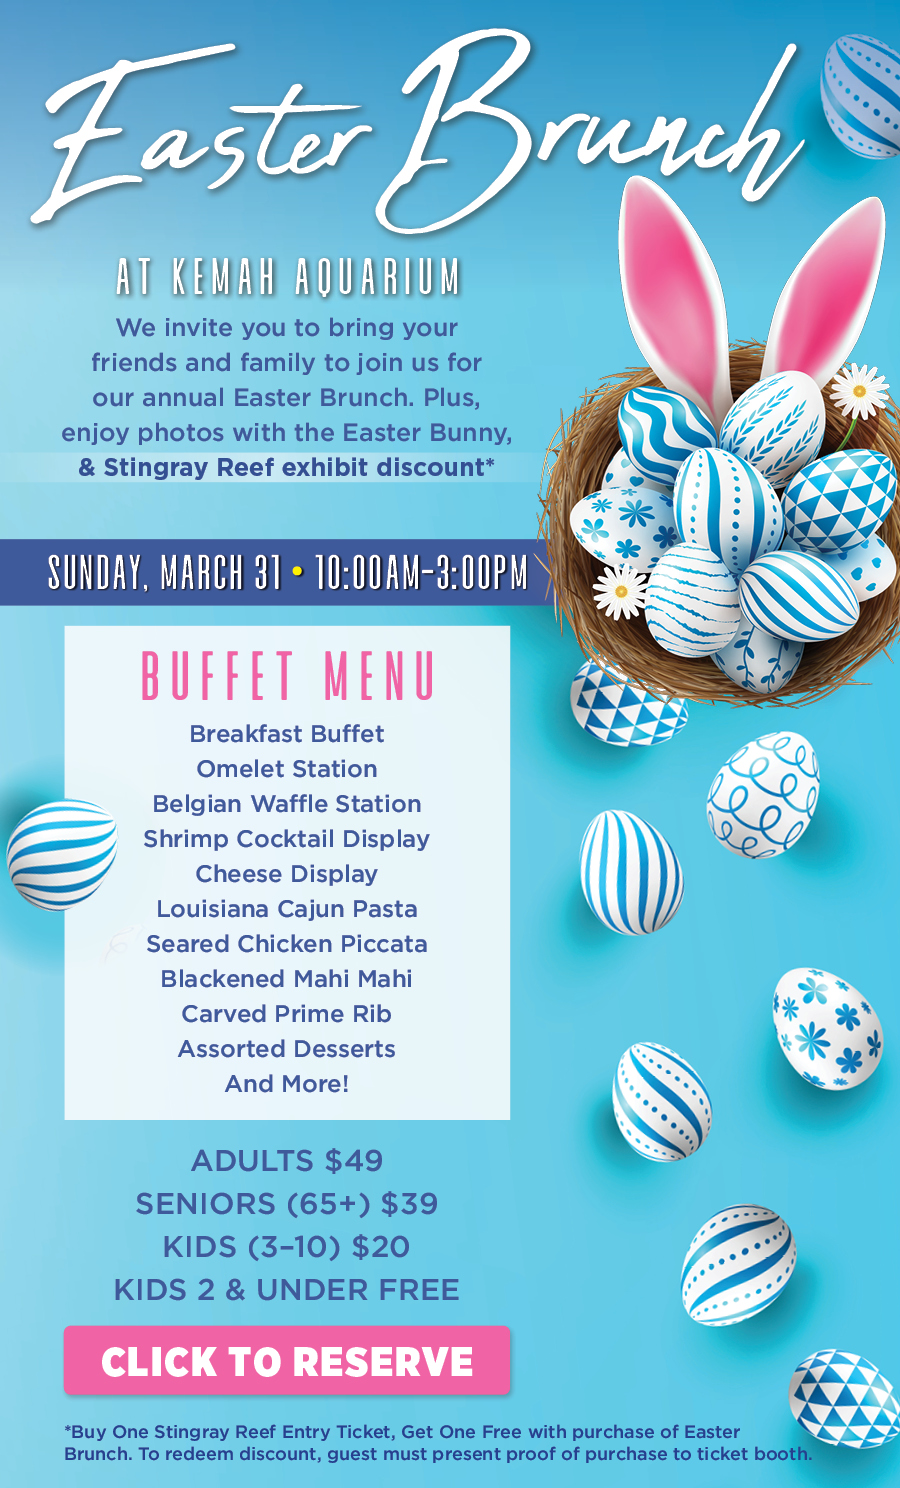 Breakfast with the Easter Bunny Saturday April 12. Reserve today!